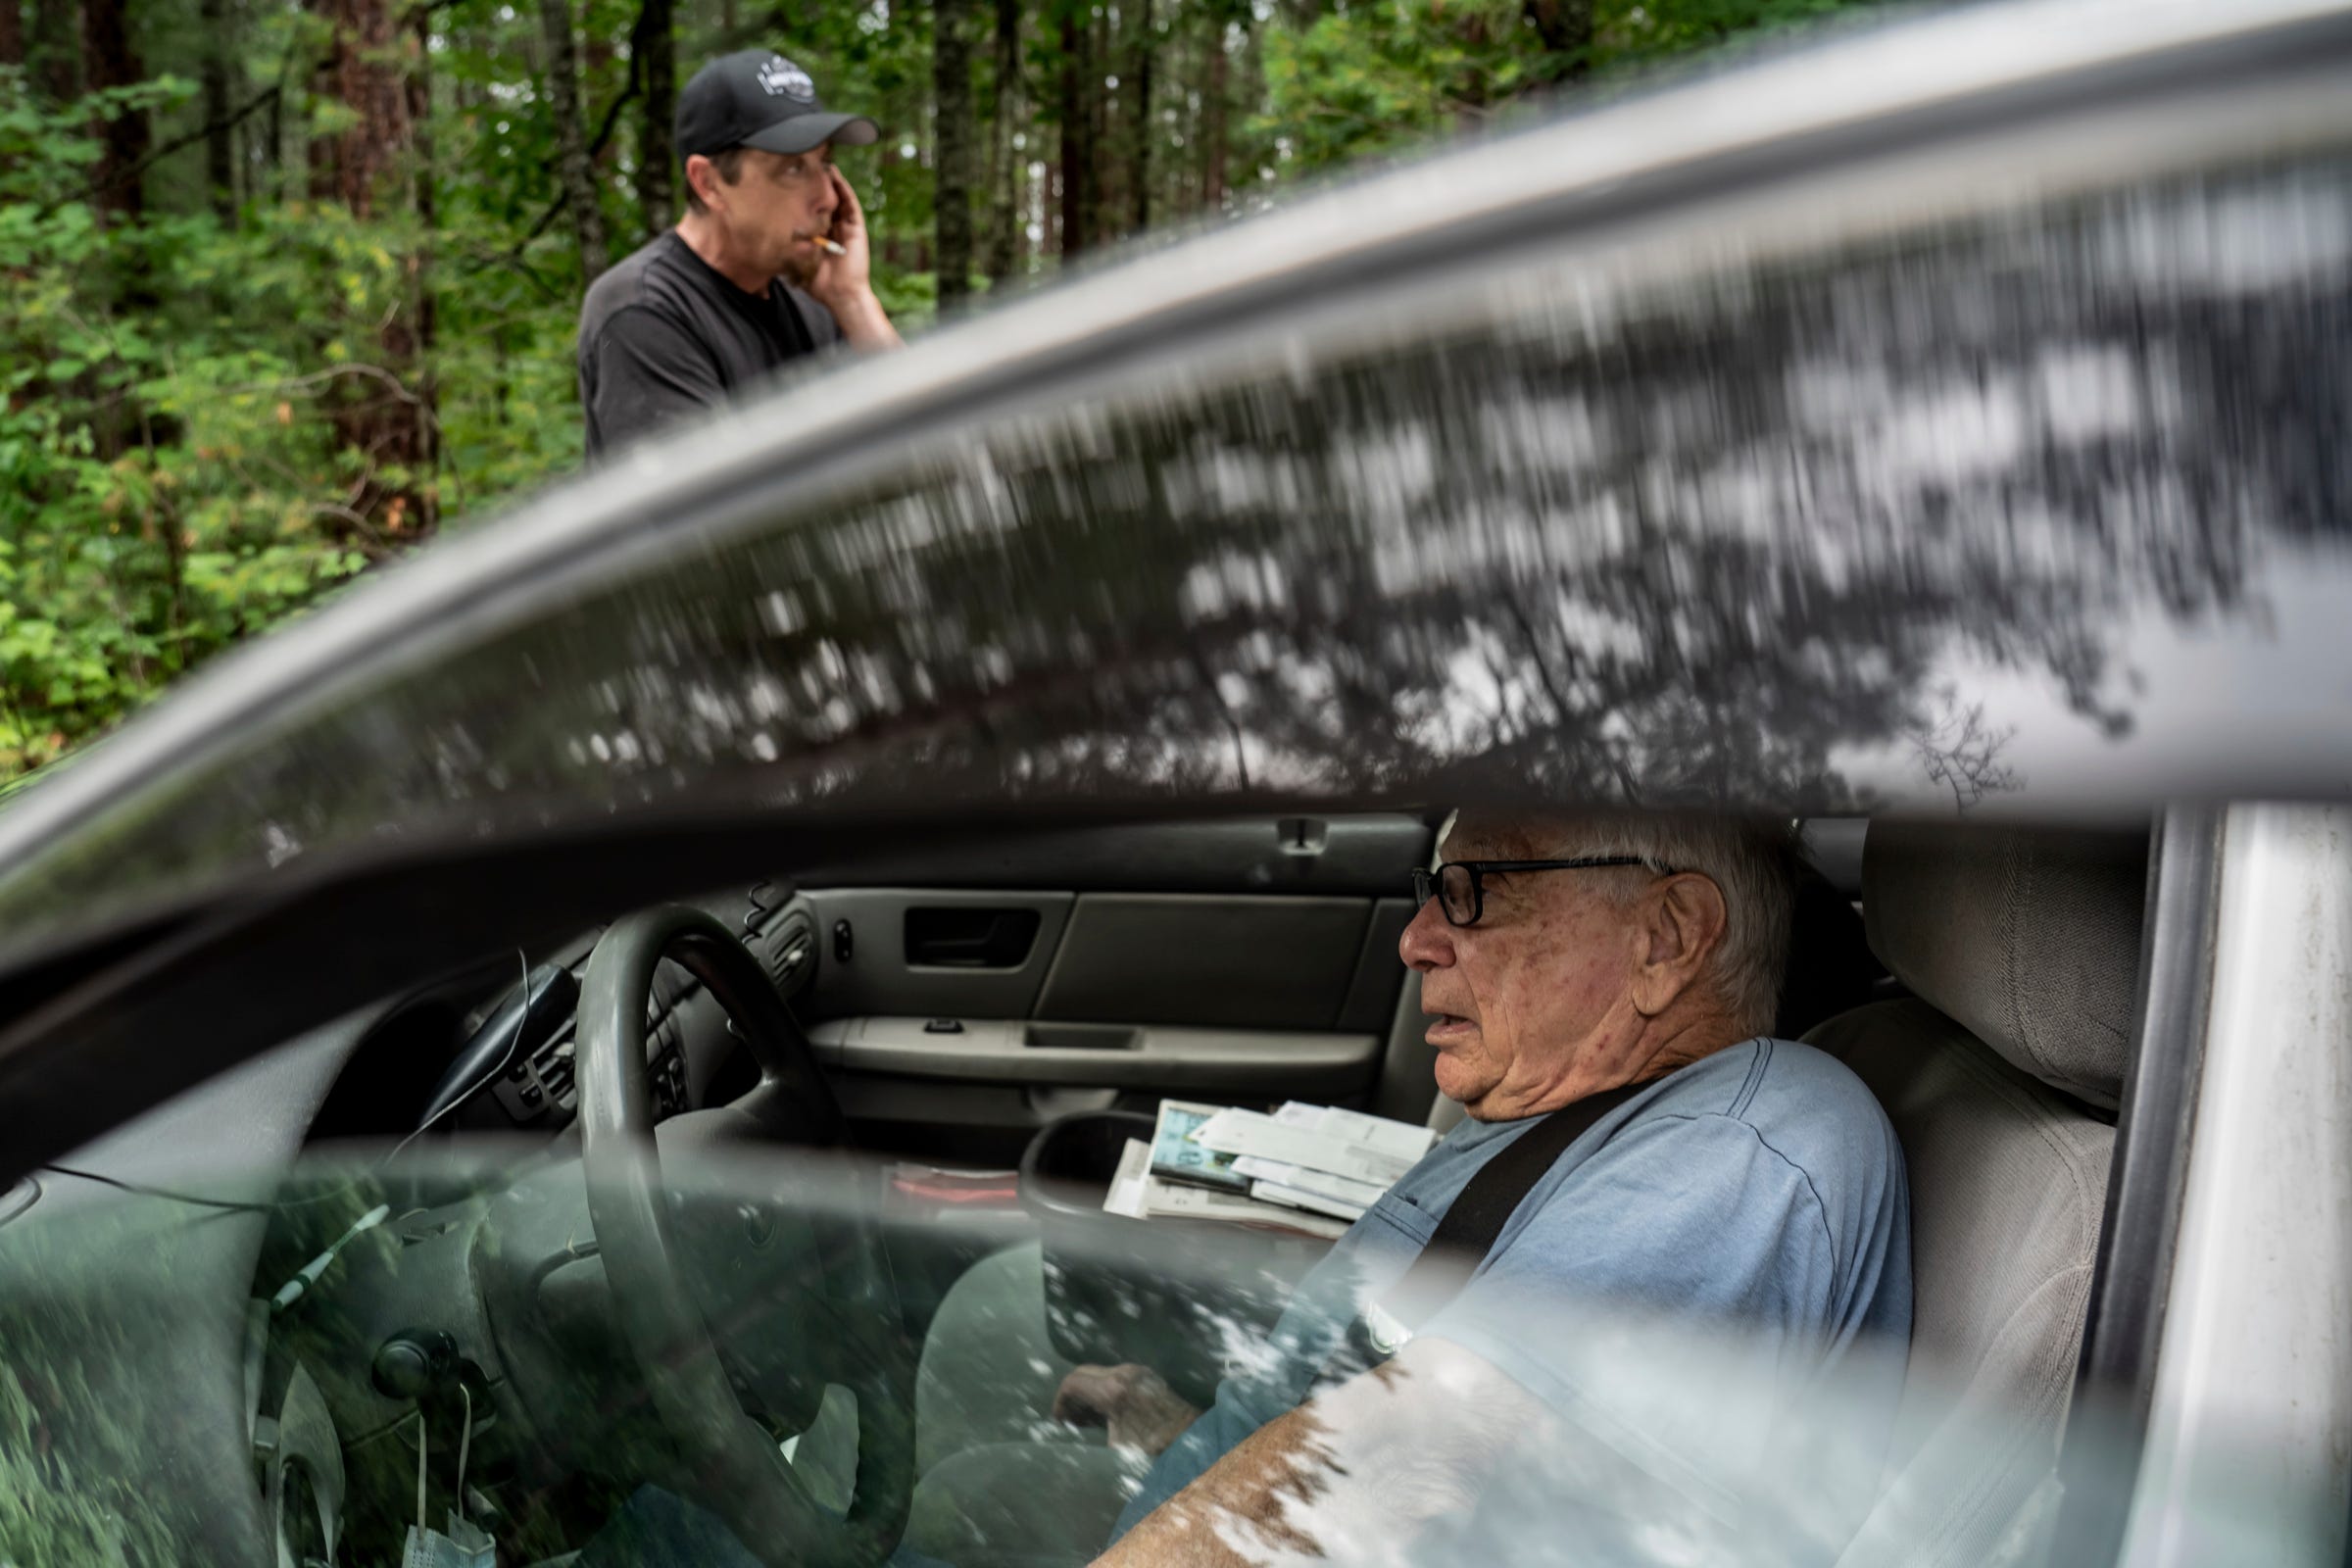 Mailman Ron Curtis, 86, of Wetmore and his trainee Tom Bourdeau, 50, of Wetmore make a pitstop along the side of the road during Curtis's 108-mile long route delivering mail through a section of Michigan's Upper Peninsula on Wednesday, July 27, 2022.